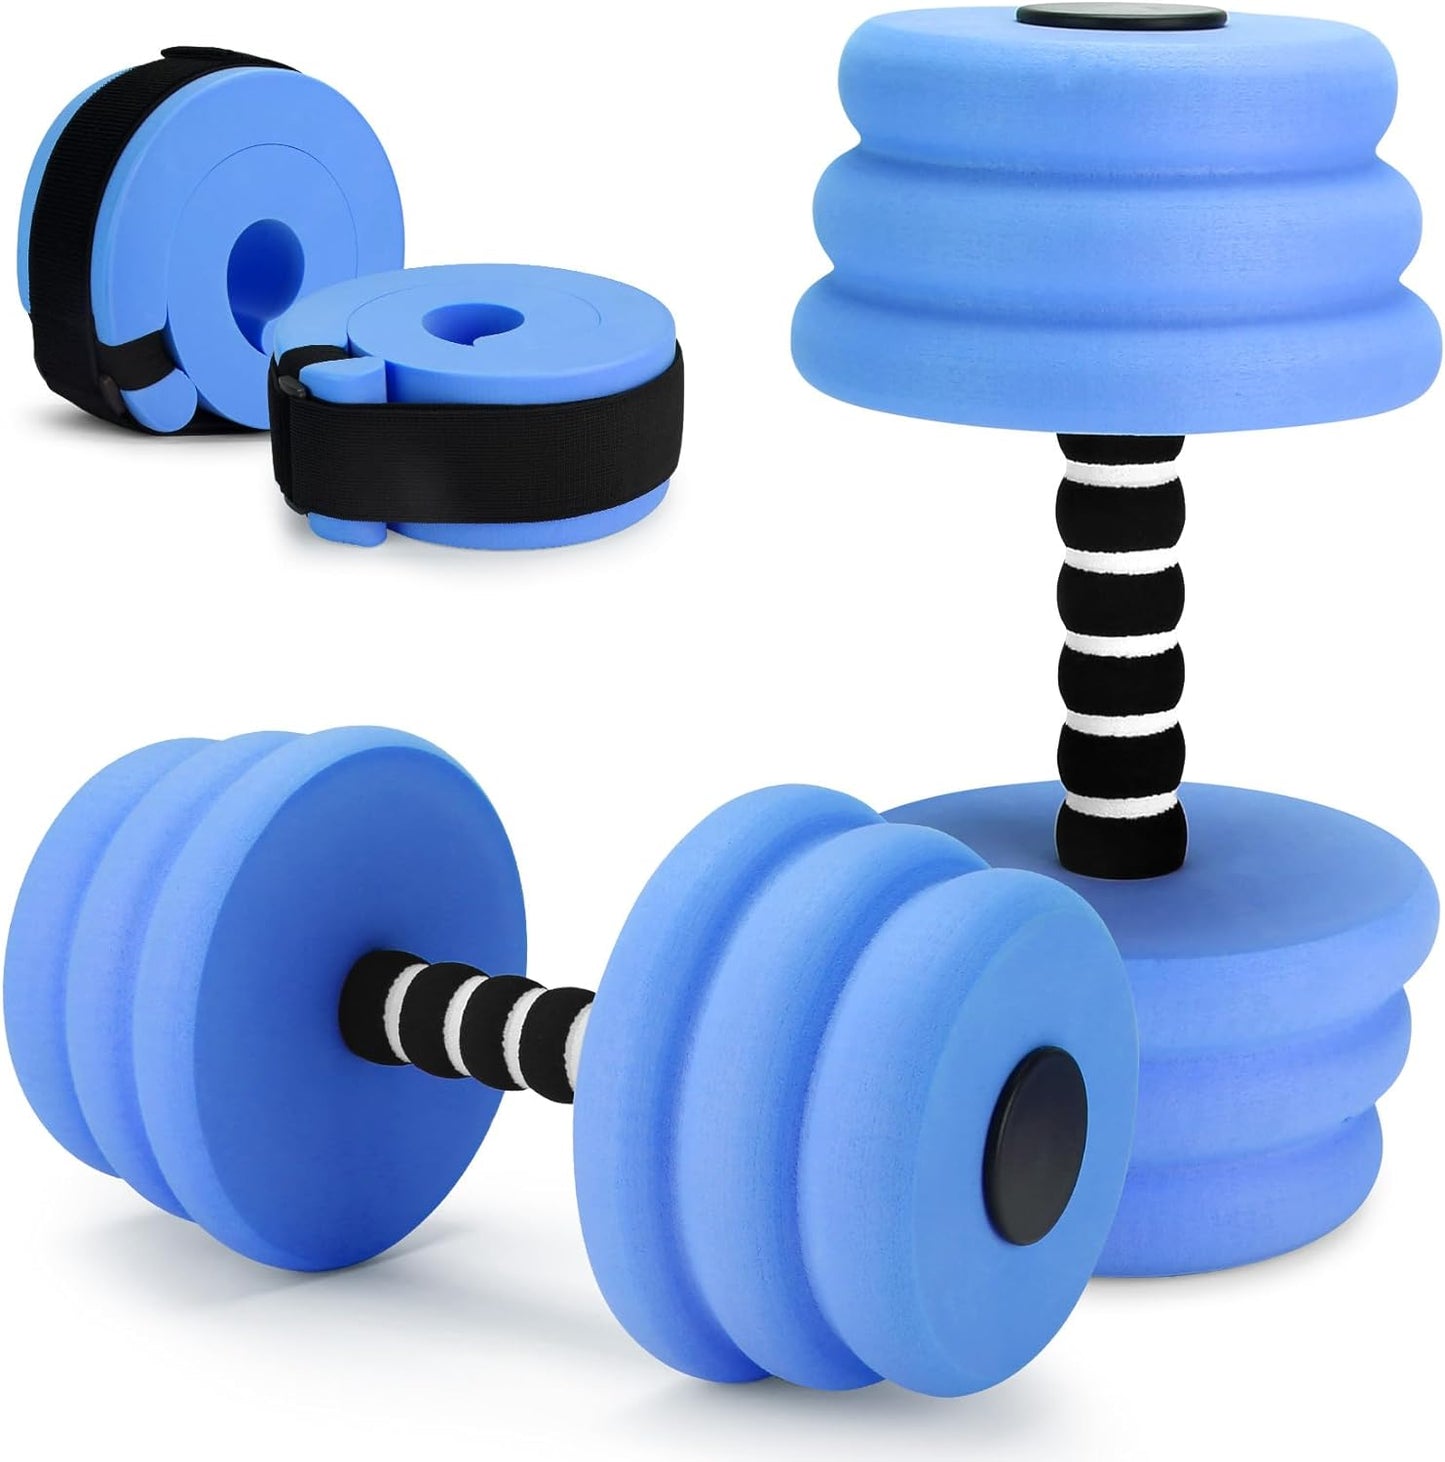 Water Aerobics Set for Aquatic Exercise, Pool Fitness Equipment Foam Water Dumbbell Set, New Upgrade Aquatic Dumbbells and Foam Swim Aquatic Cuffs, Water Workout Fitness Tool